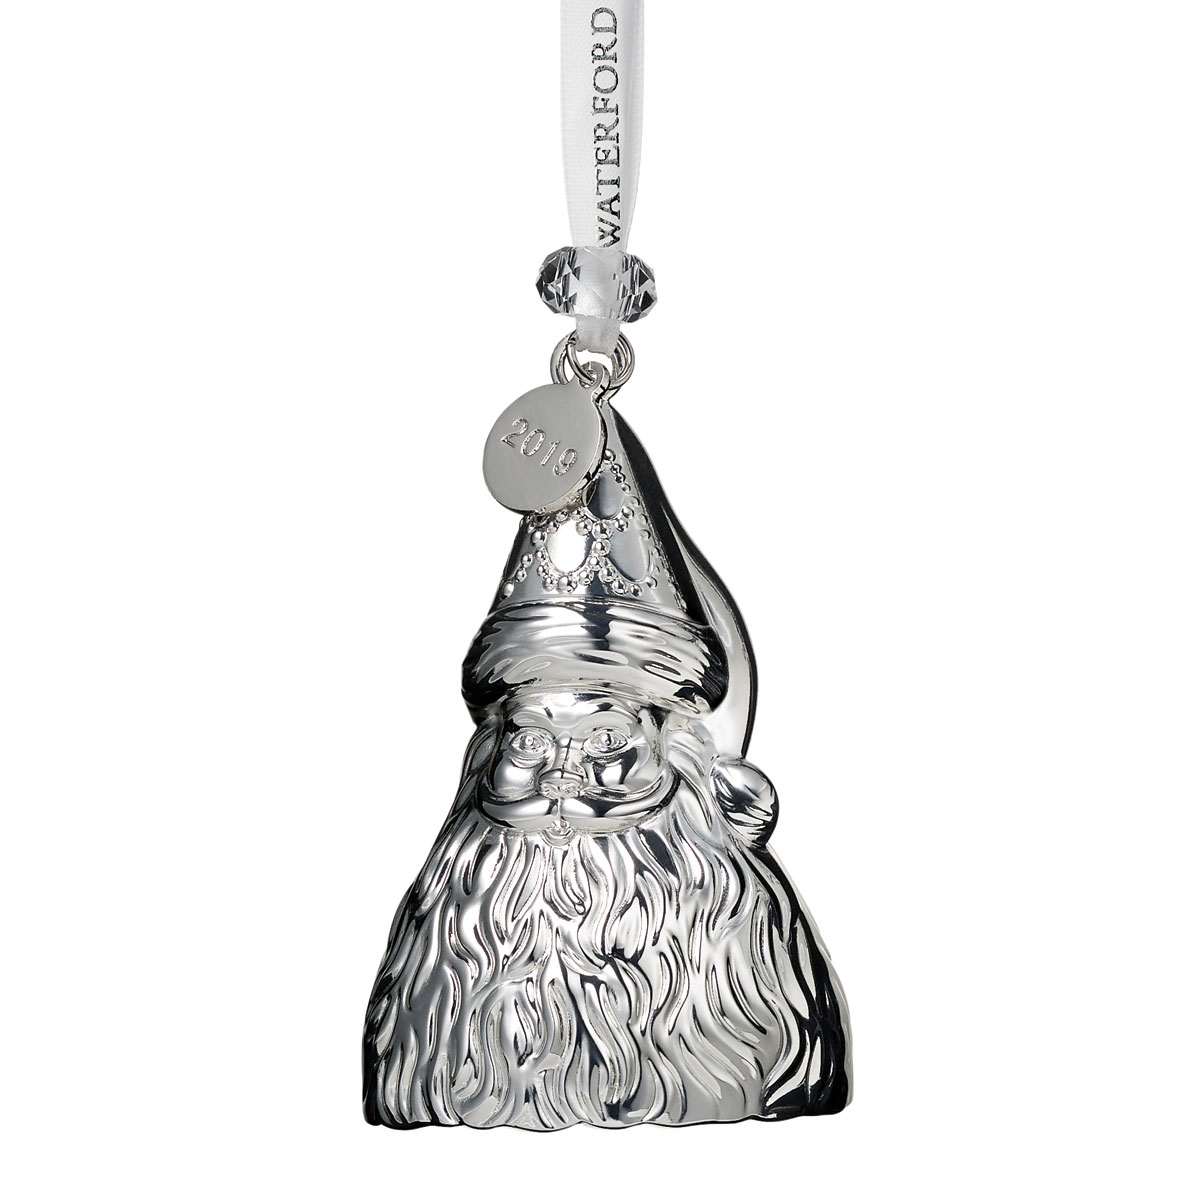 Waterford 2019 Silver Father Christmas Ornament